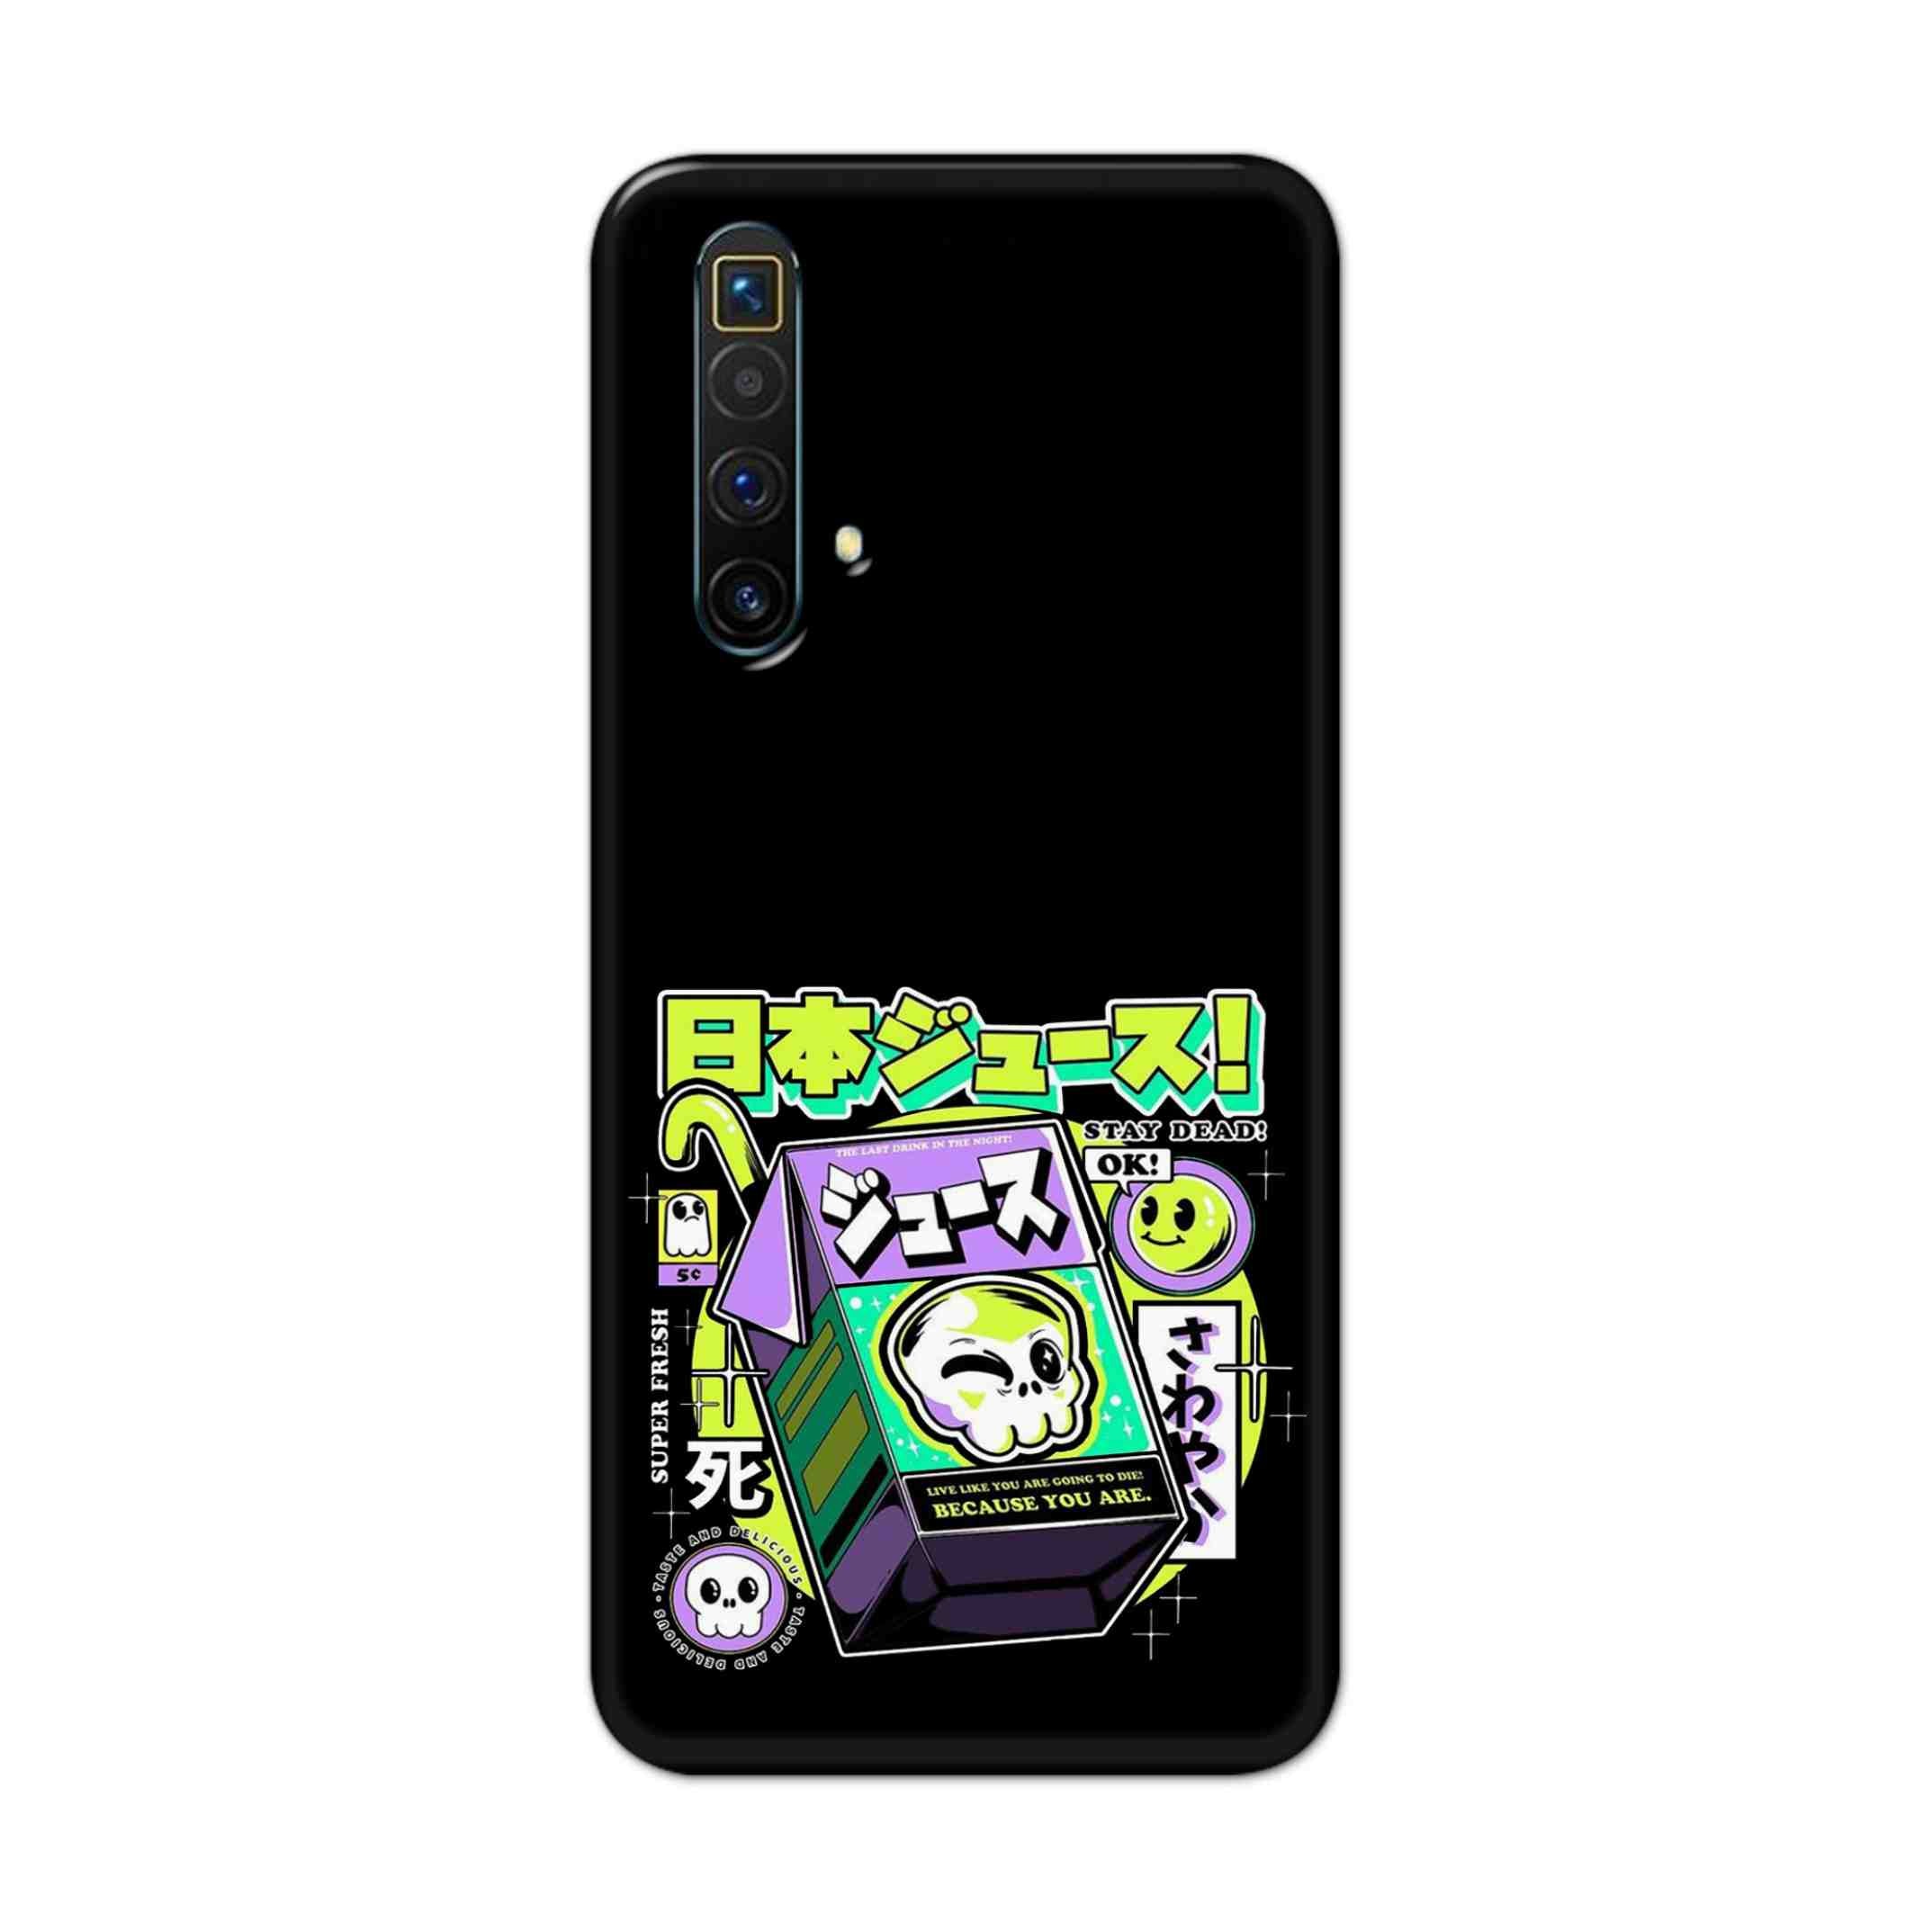 Buy Because You Are Hard Back Mobile Phone Case Cover For Oppo Realme X3 Online